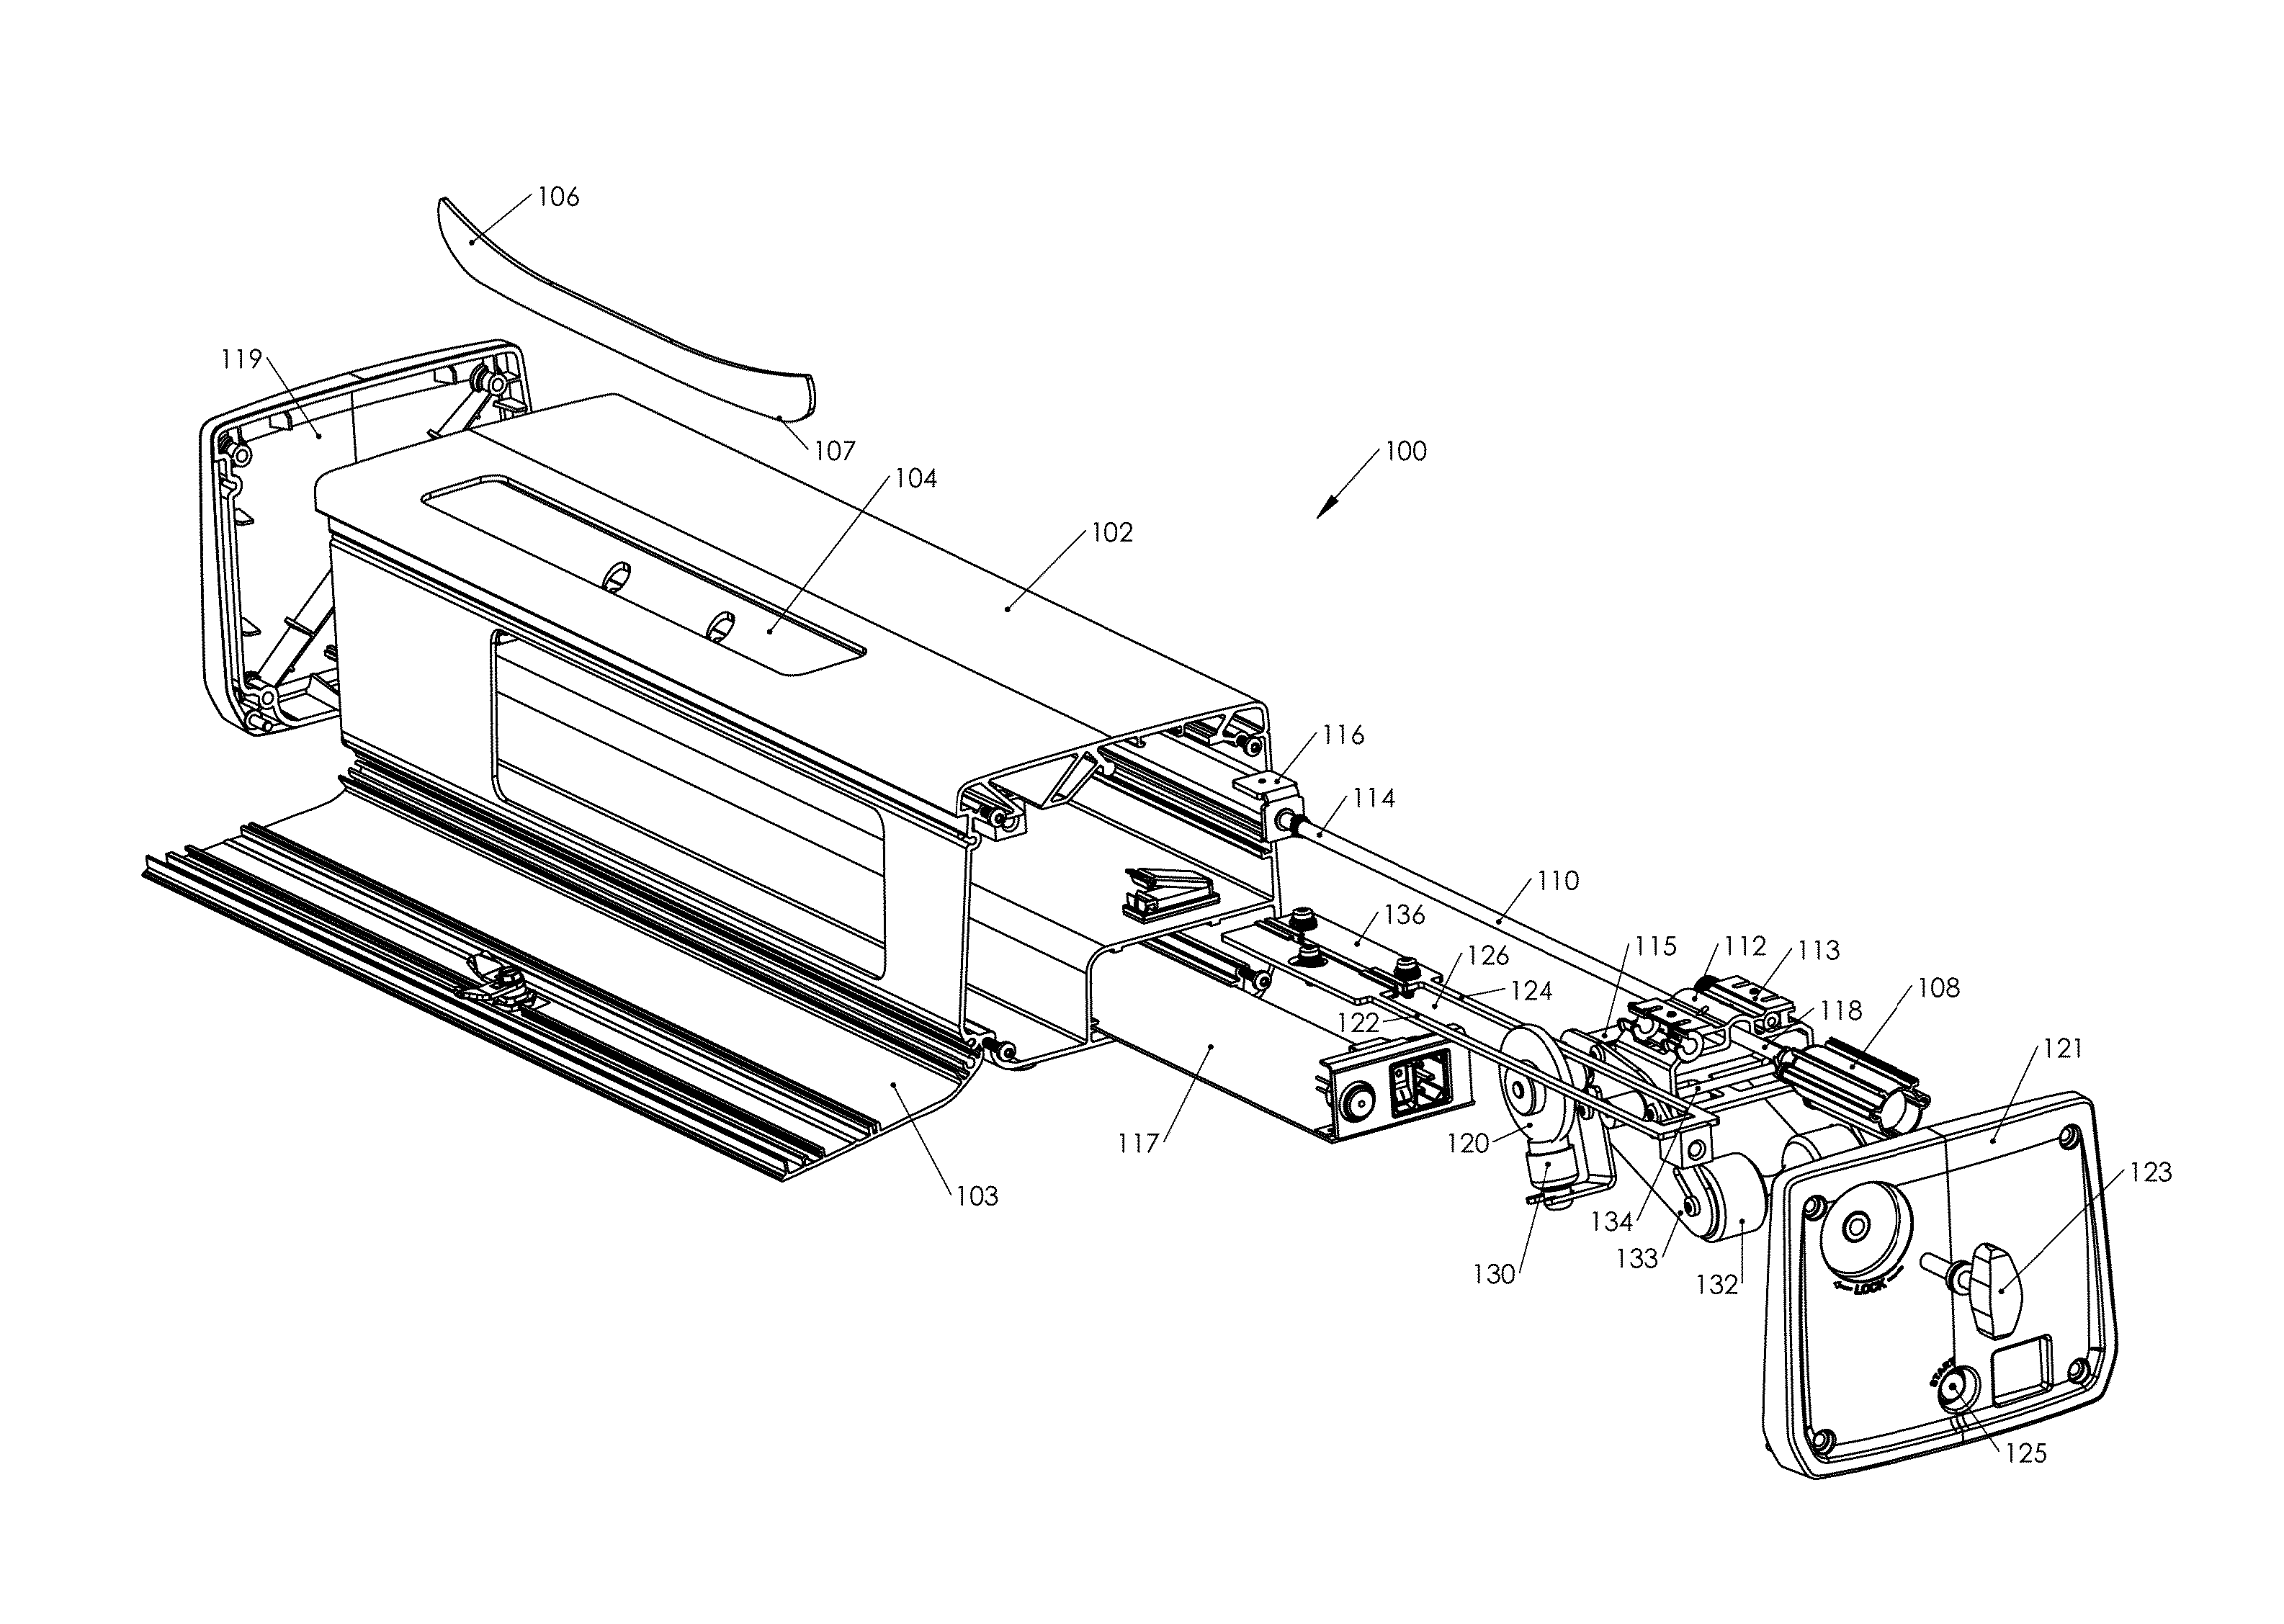 Method for automatic sharpening of a blade